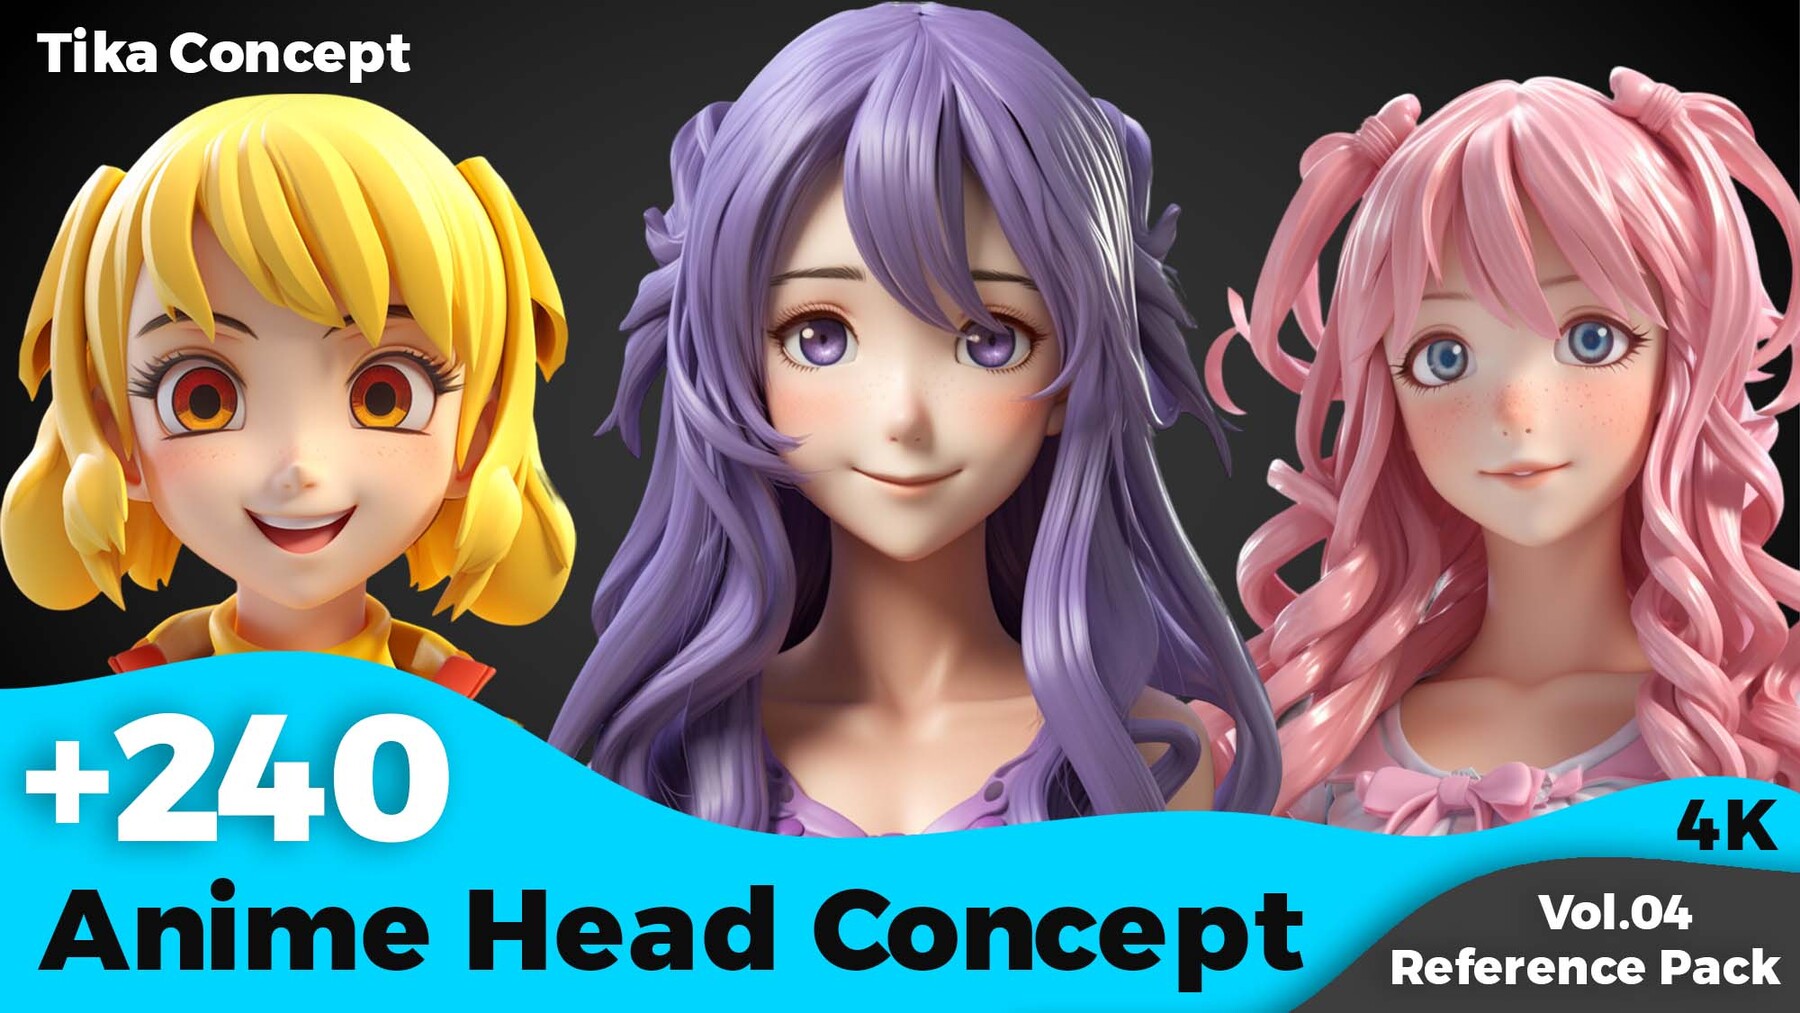 Creating an anime head in 3ds Max  3dtotal  Learn  Create  Share